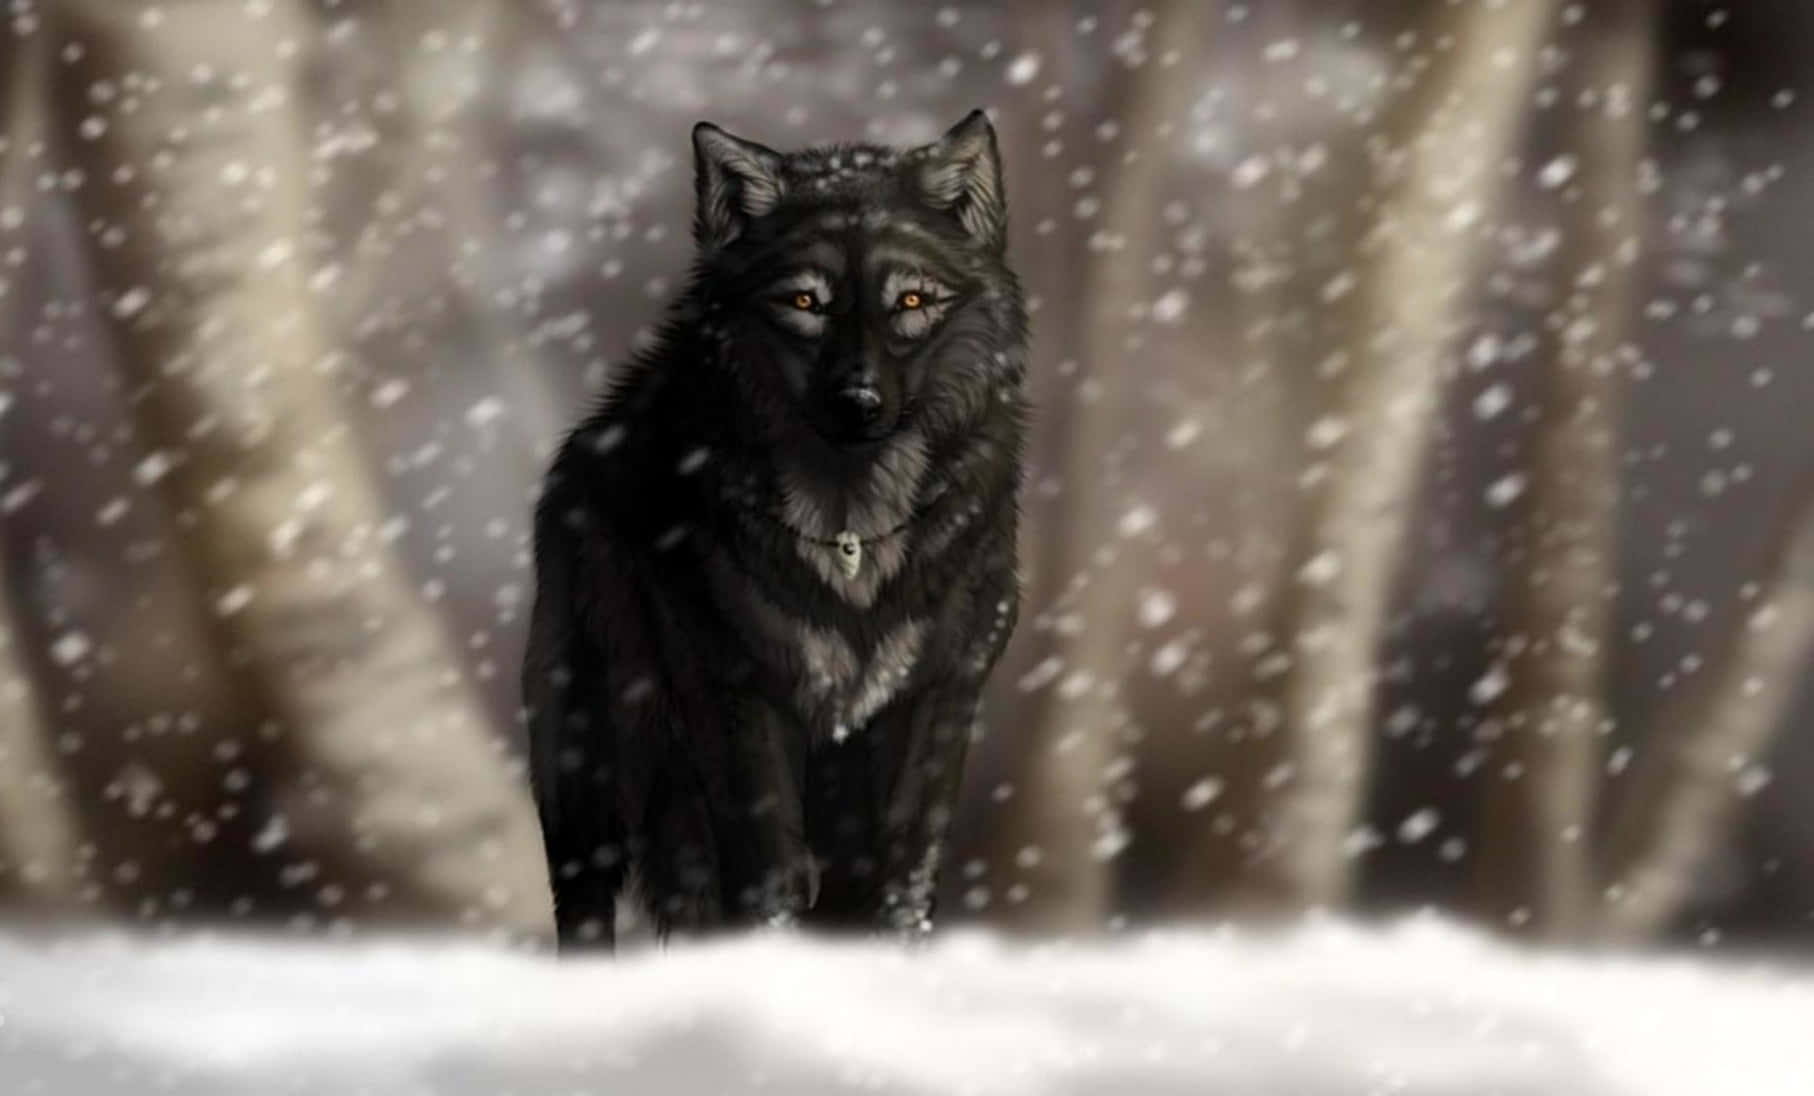 "The Black Wolf - Strength and Power"